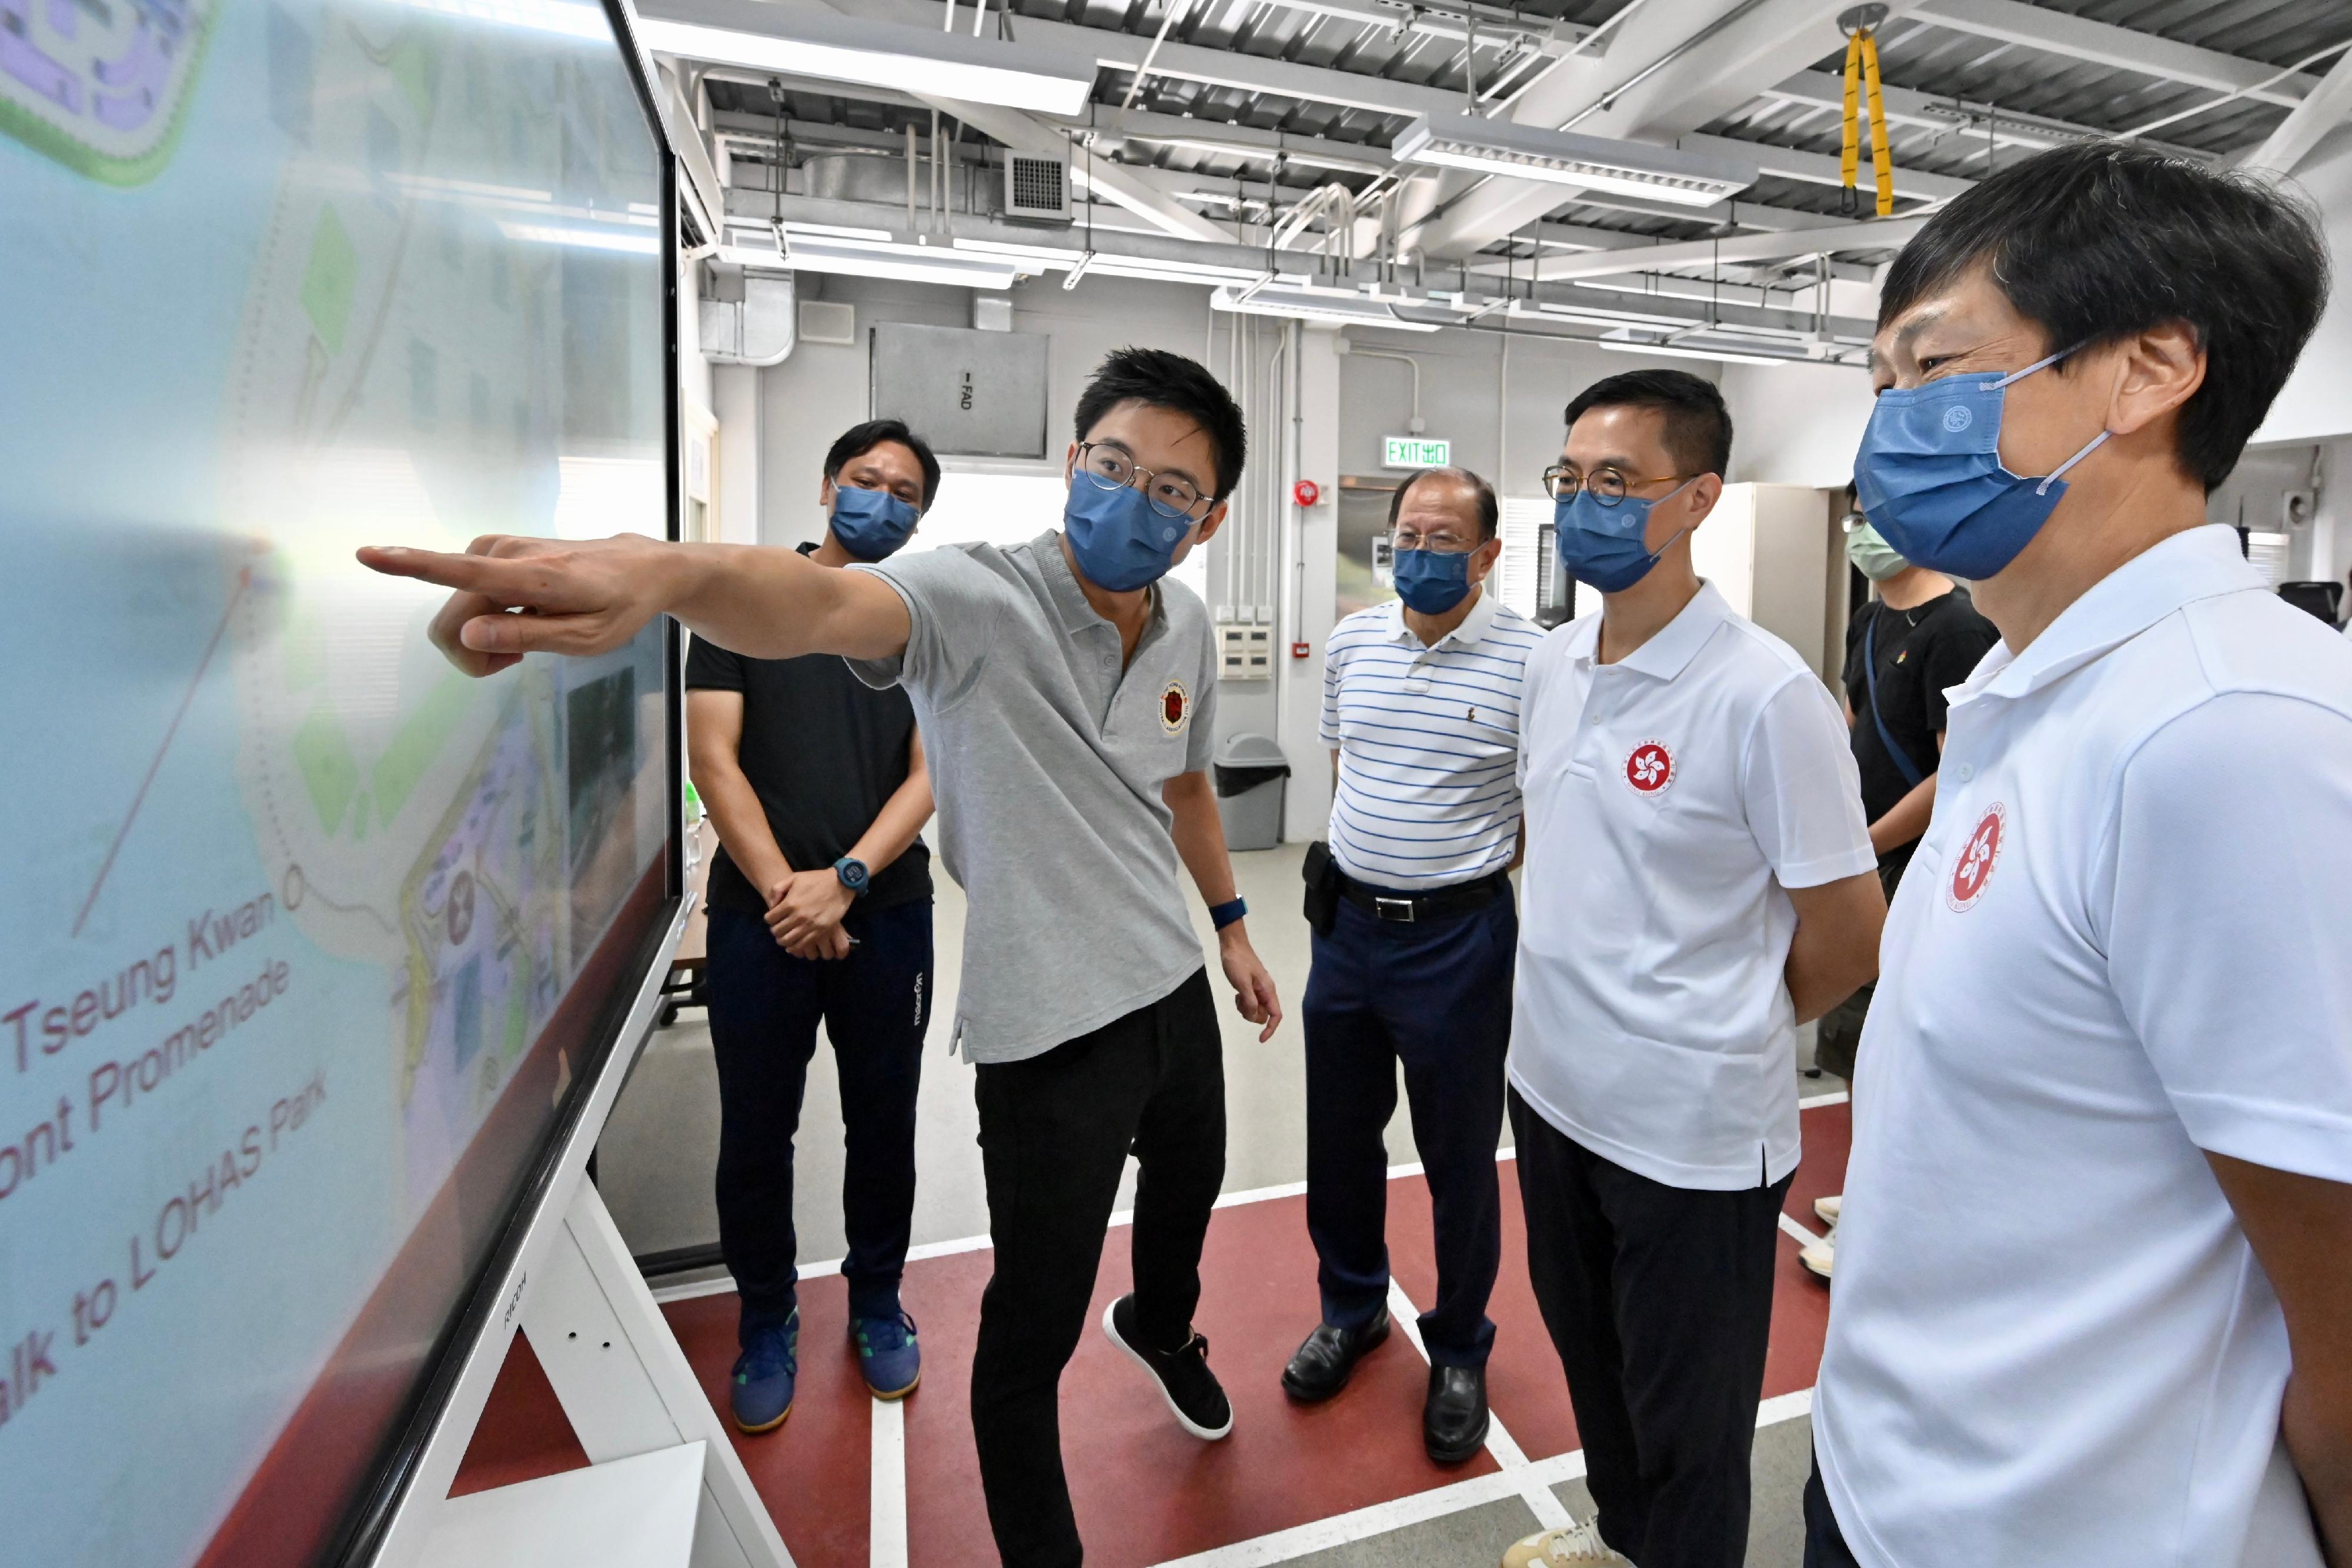 The Secretary for Culture, Sports and Tourism, Mr Kevin Yeung, visited the Jockey Club Hong Kong Football Association (HKFA) Football Training Centre today (July 13). Photo shows Mr Yeung (second right) being briefed by the HKFA Vice Chairman, Mr Eric Fok (second left), on the HKFA’s work on promoting football development.